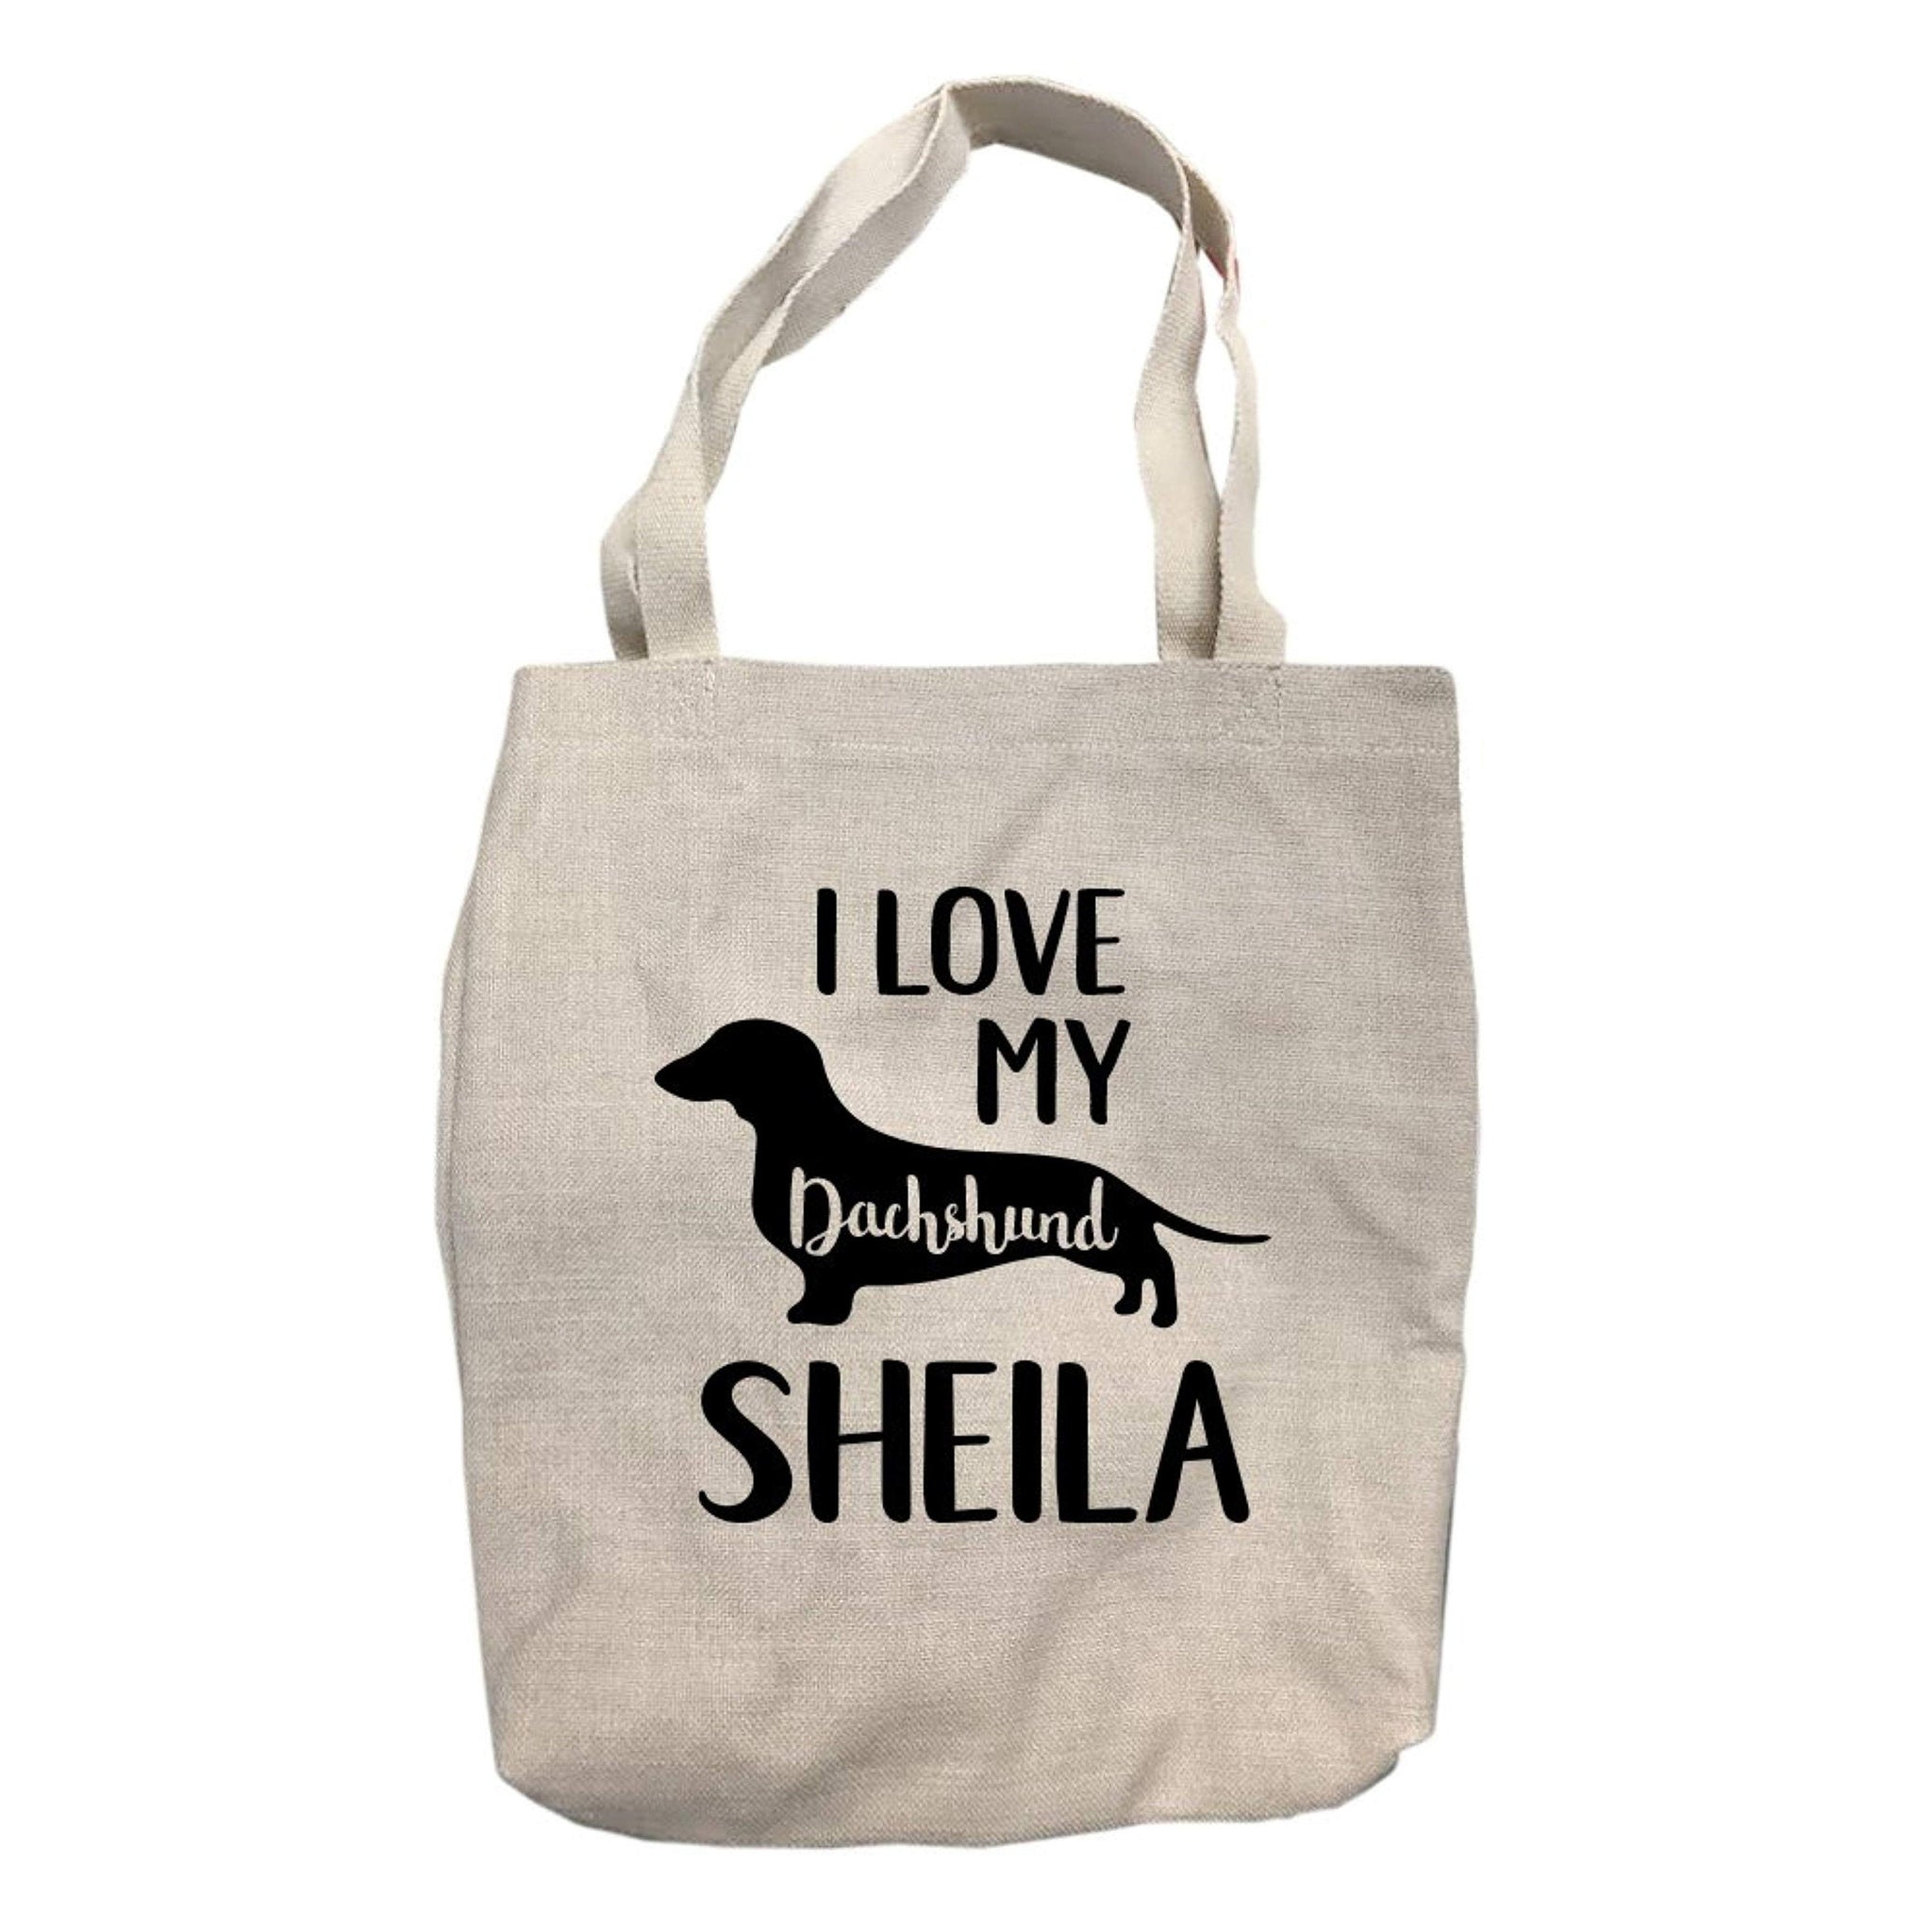 Personalized I Love My Dachshund Tote Bag